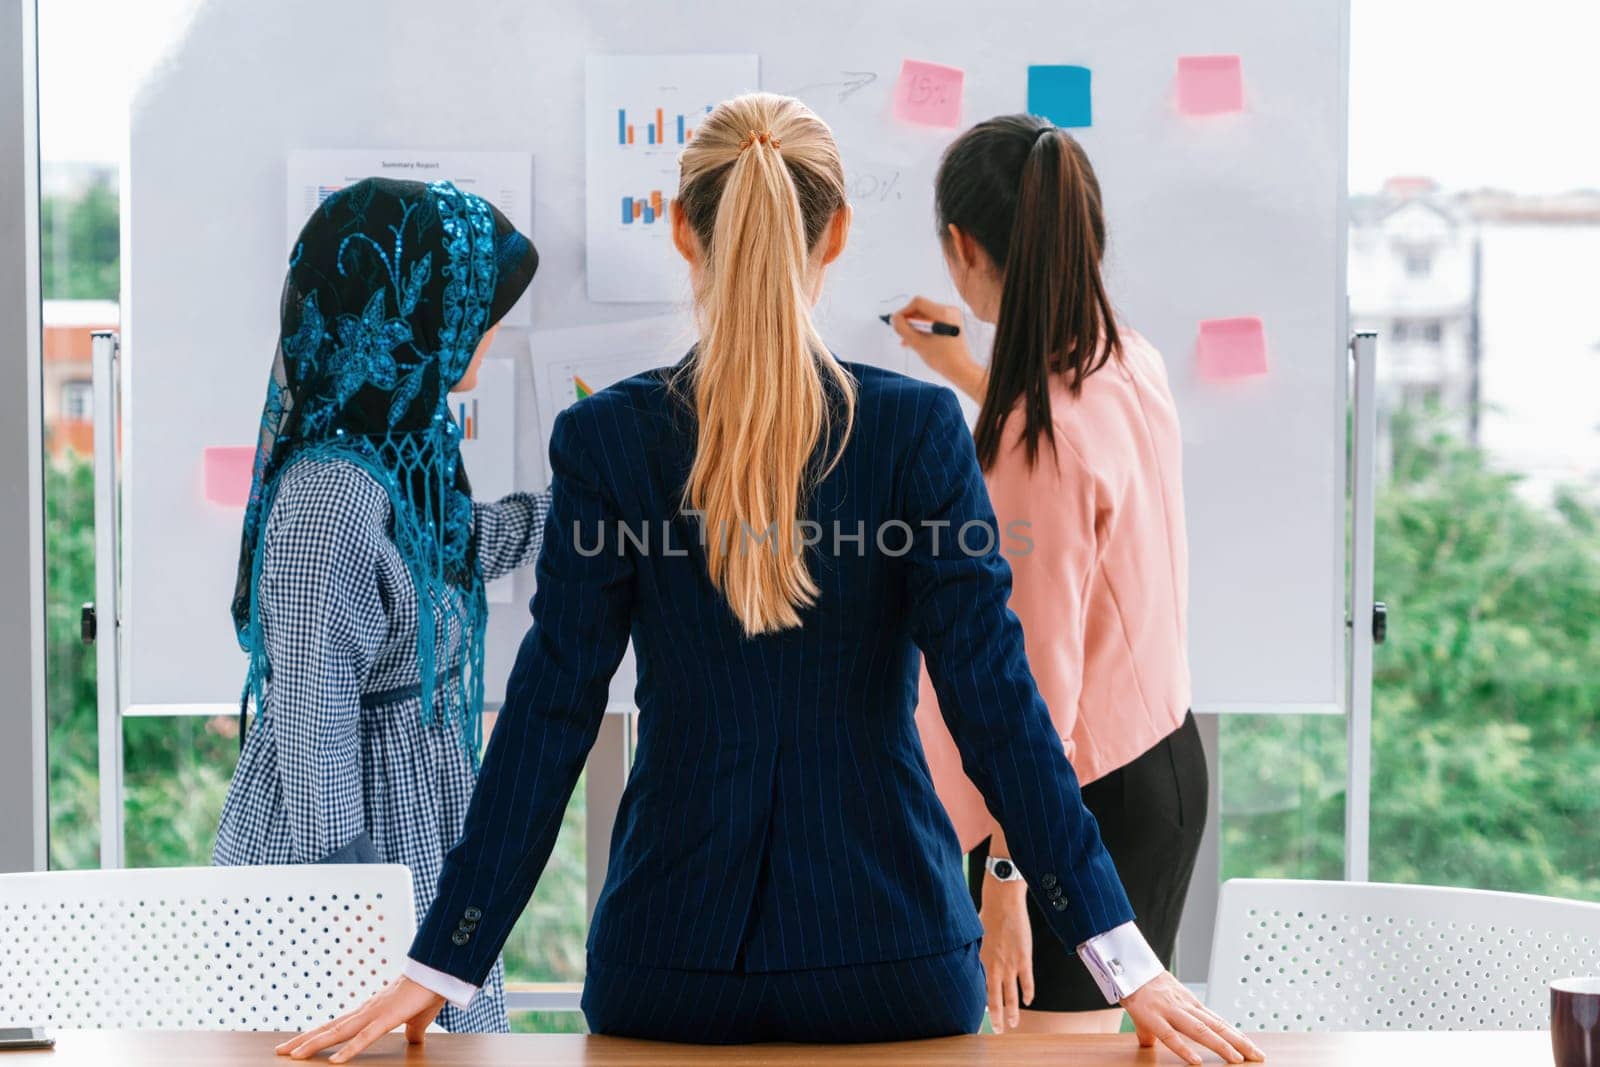 Multicultural working group. Team of businesswomen of different ethnicity, Caucasian, Asian and Arabic working together in team meeting at office. Multiethnic teamwork concept. uds